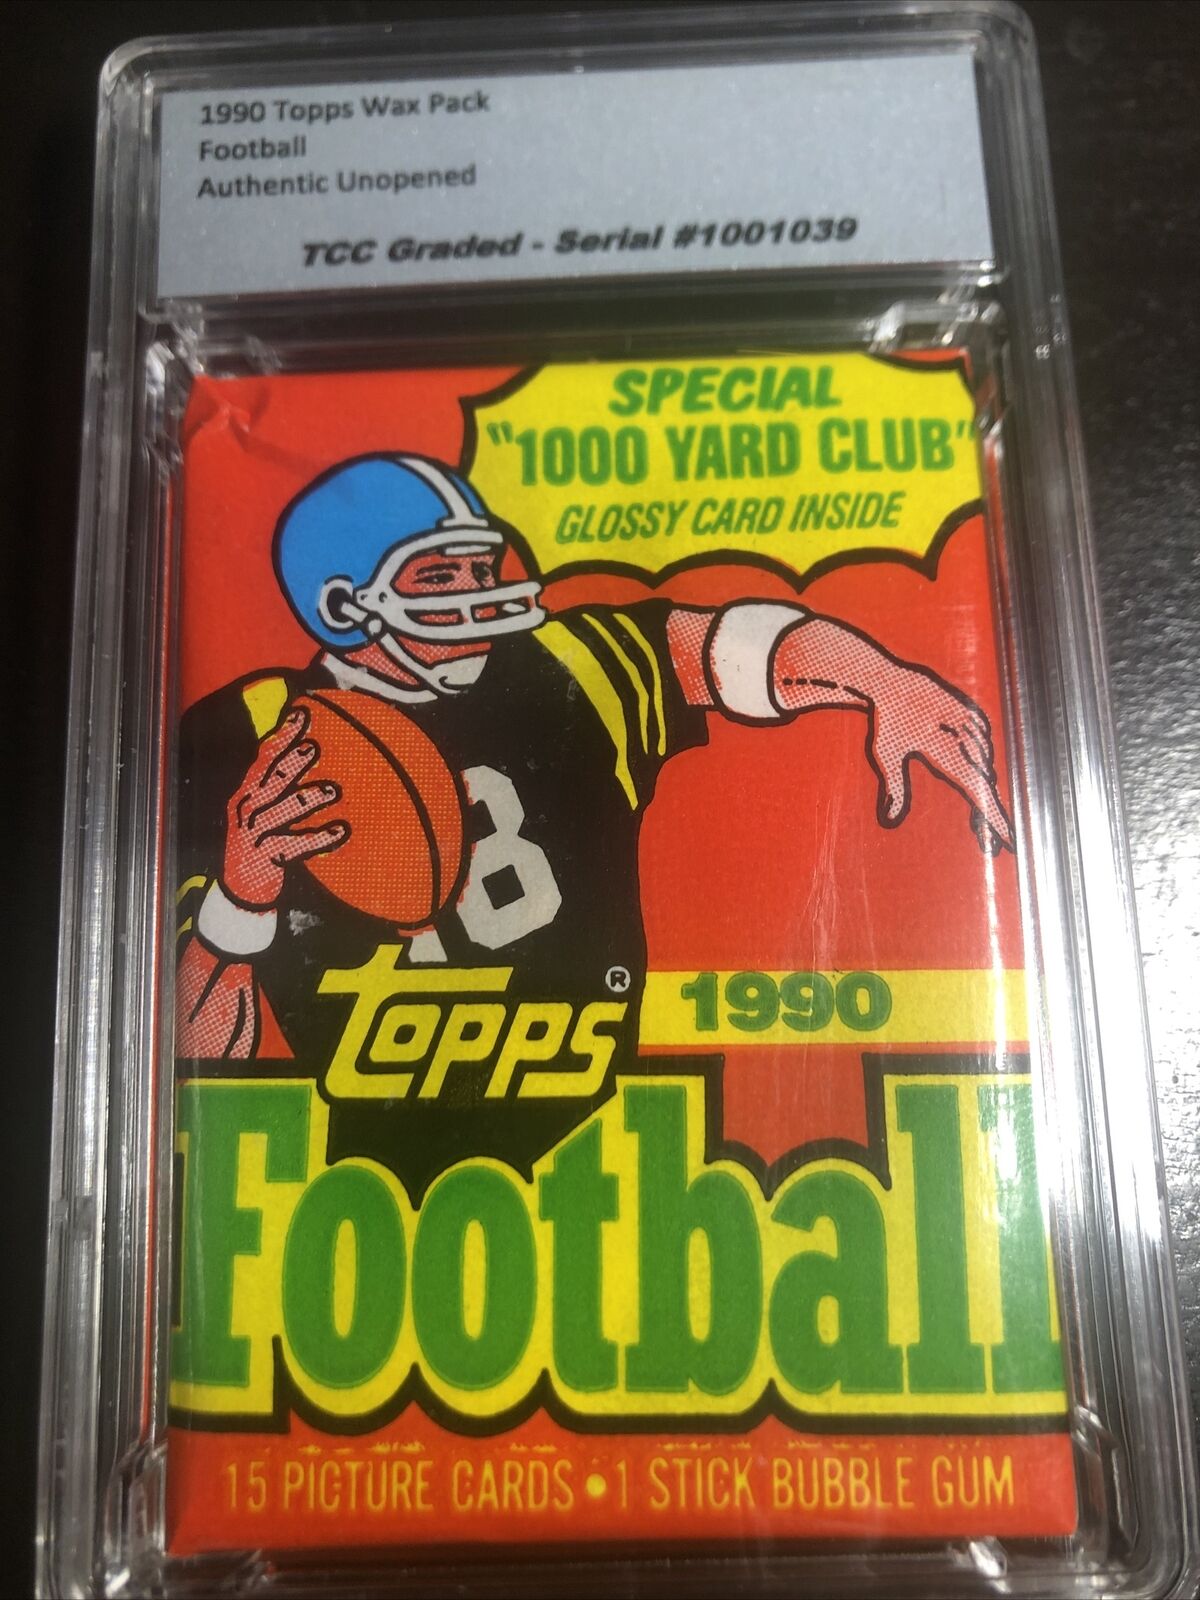 1990 Topps Football Wax Pack Certified Graded Authentic Unopened Encapsulated